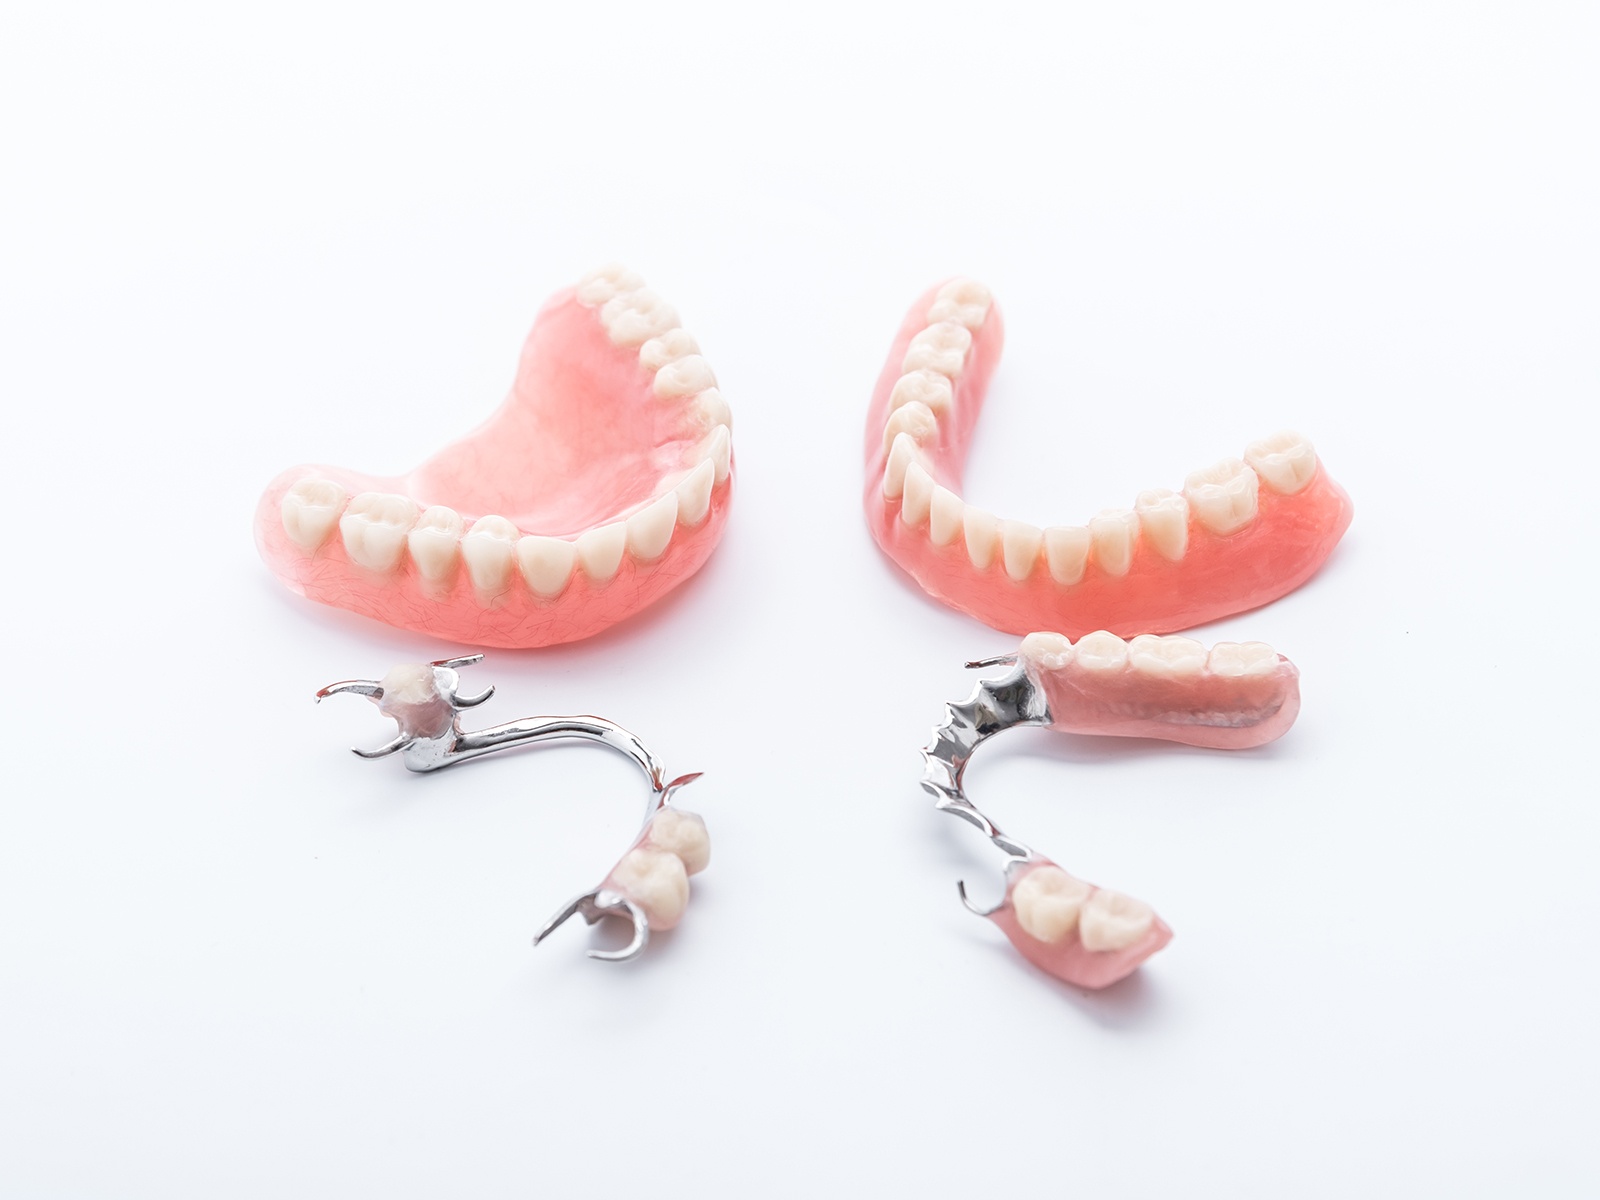 How Hard Is It To Get Used To Dentures?